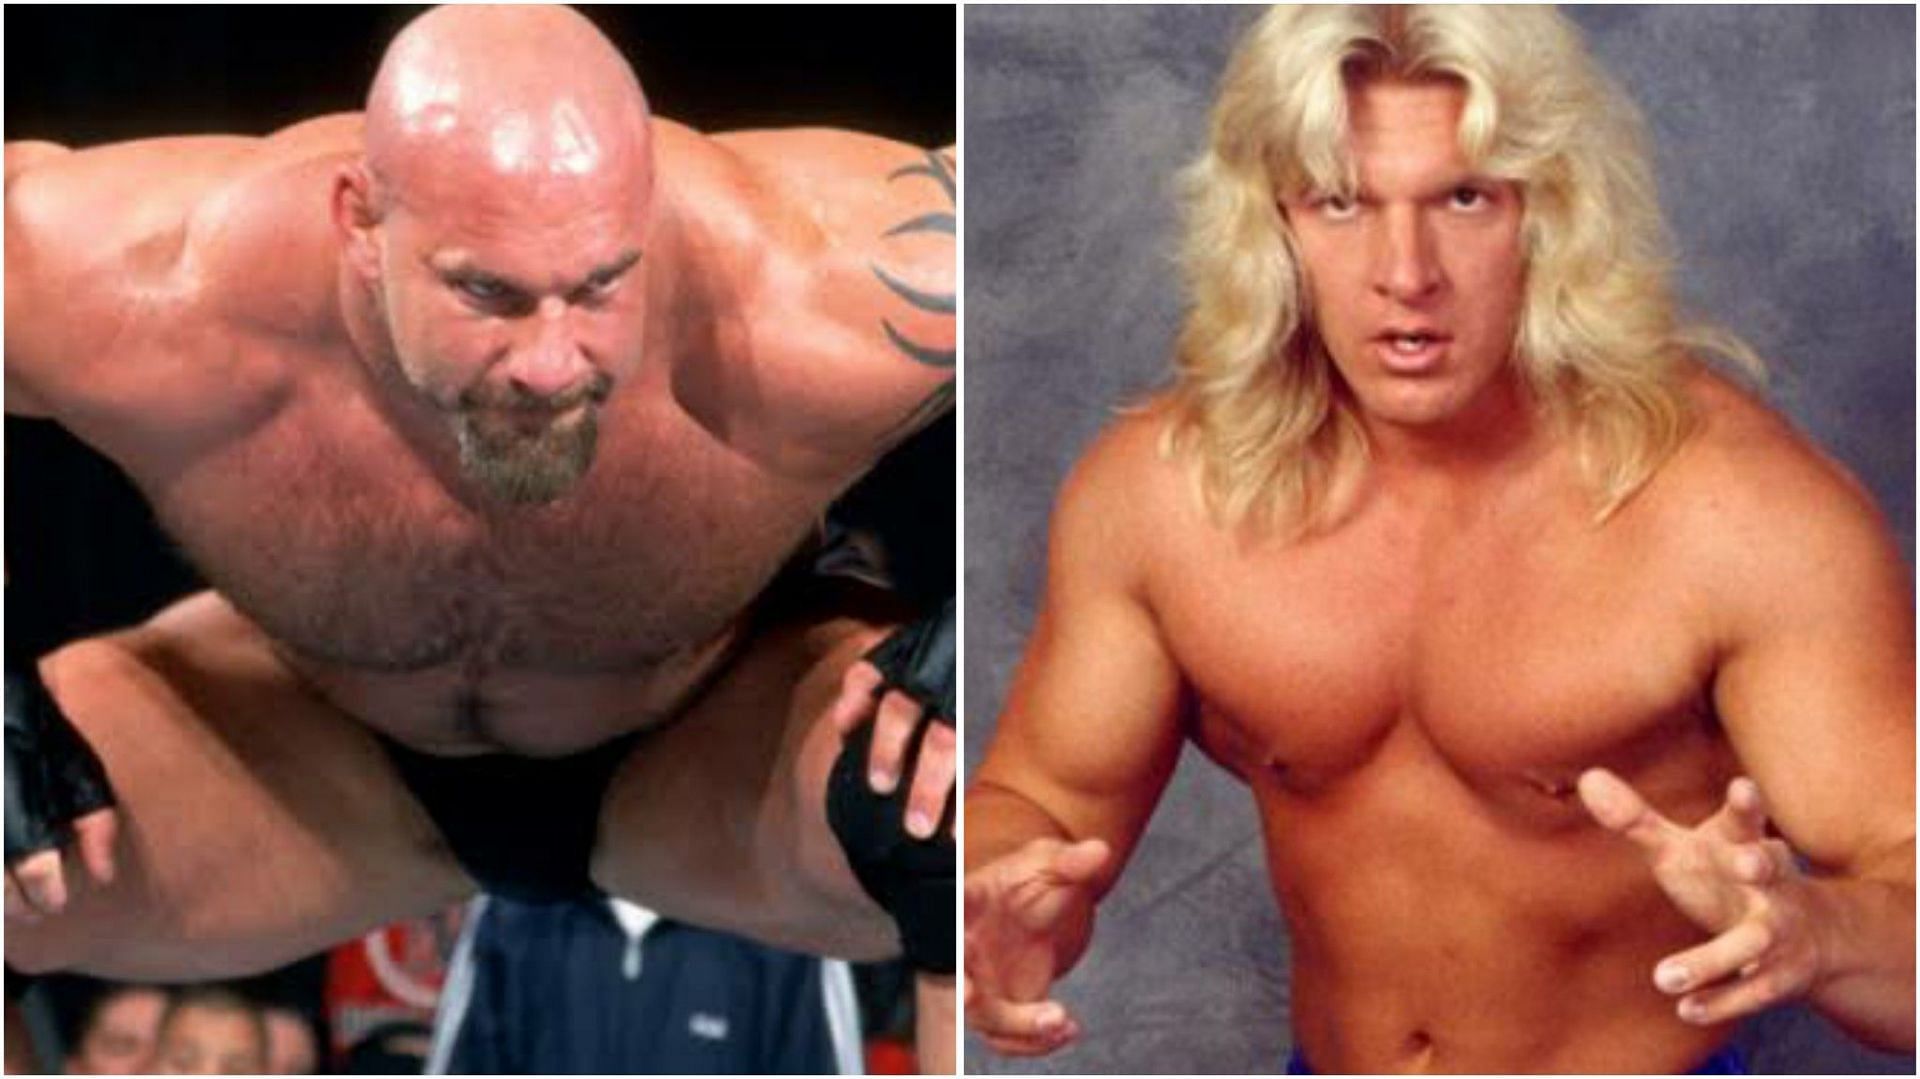 Former WCW stars Triple H and Goldberg went on to win world championships in WWE.